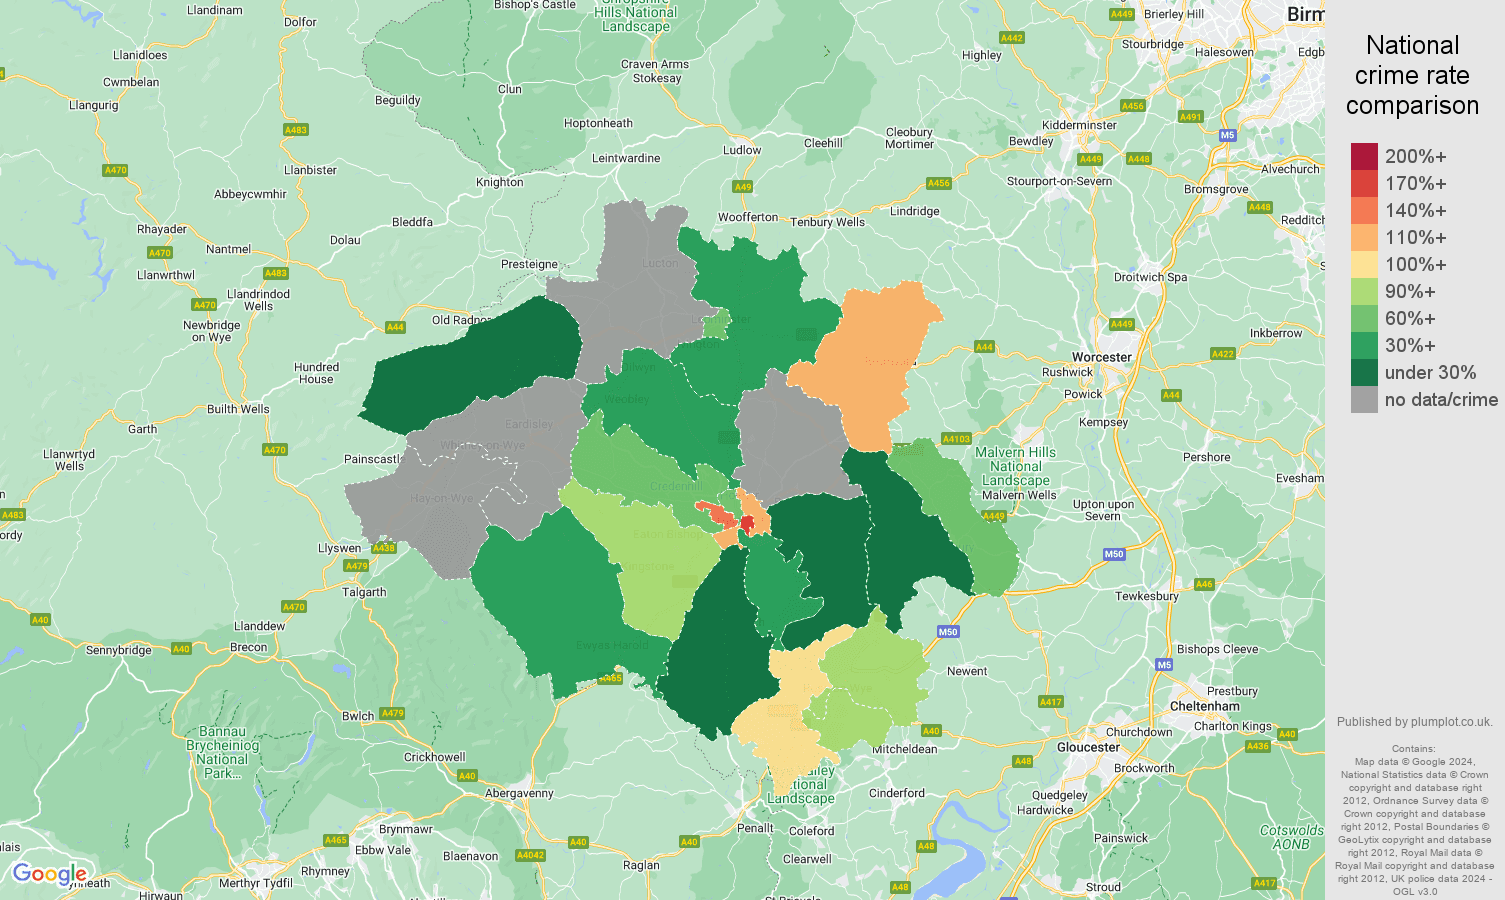 Hereford possession of weapons crime rate comparison map